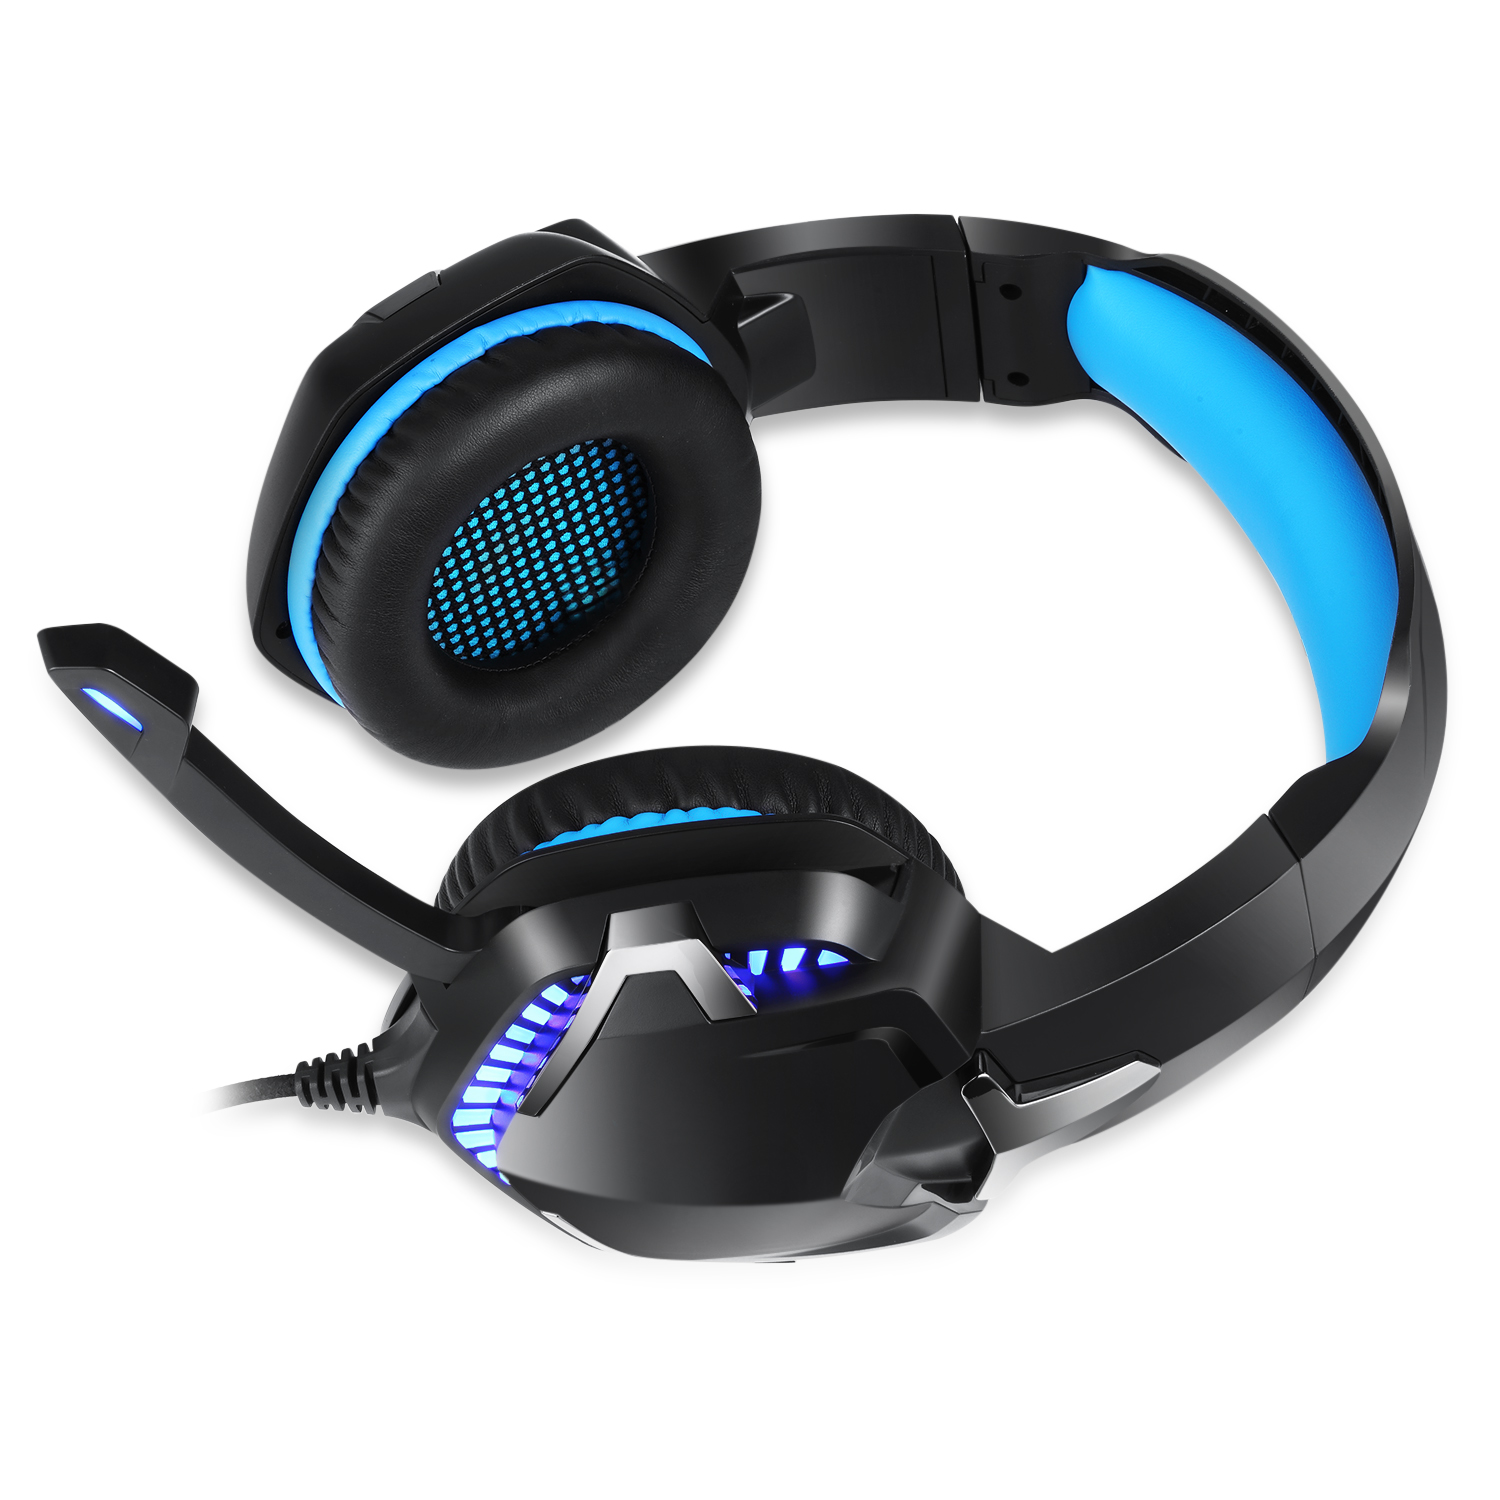 Cheap Free Shipping Sample 2021 Latest Wired Gaming Headset for PC 7.1 3.5 mm USB Noise Cancelling LED Display Vibration Headset Wire Gamer Headphone